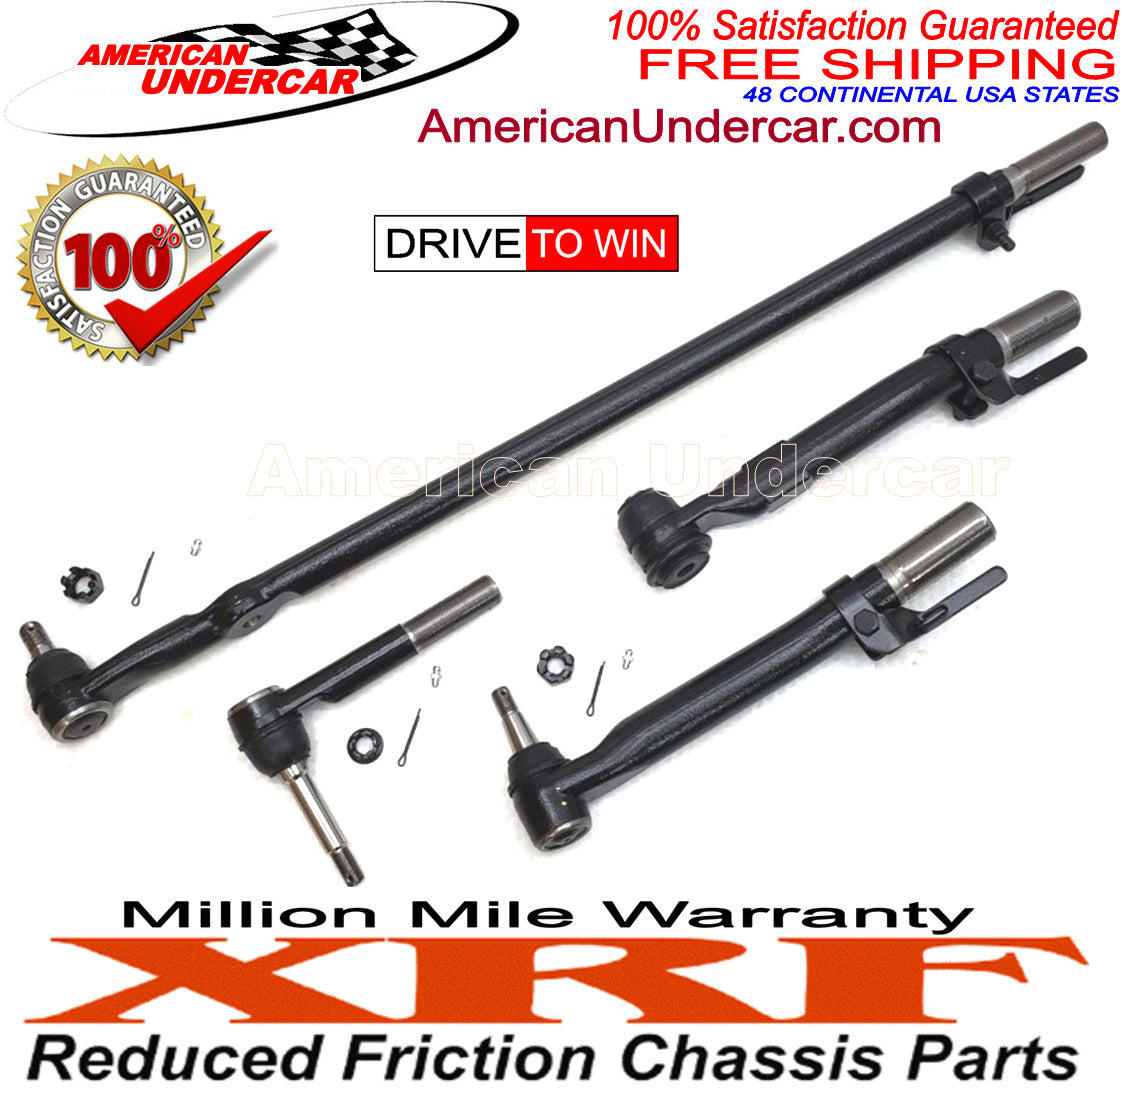 XRF Drag Link Tie Rod Steering Kit for 2011-2019 Ford F450, F550 Super Duty with Bent Pitman Arm